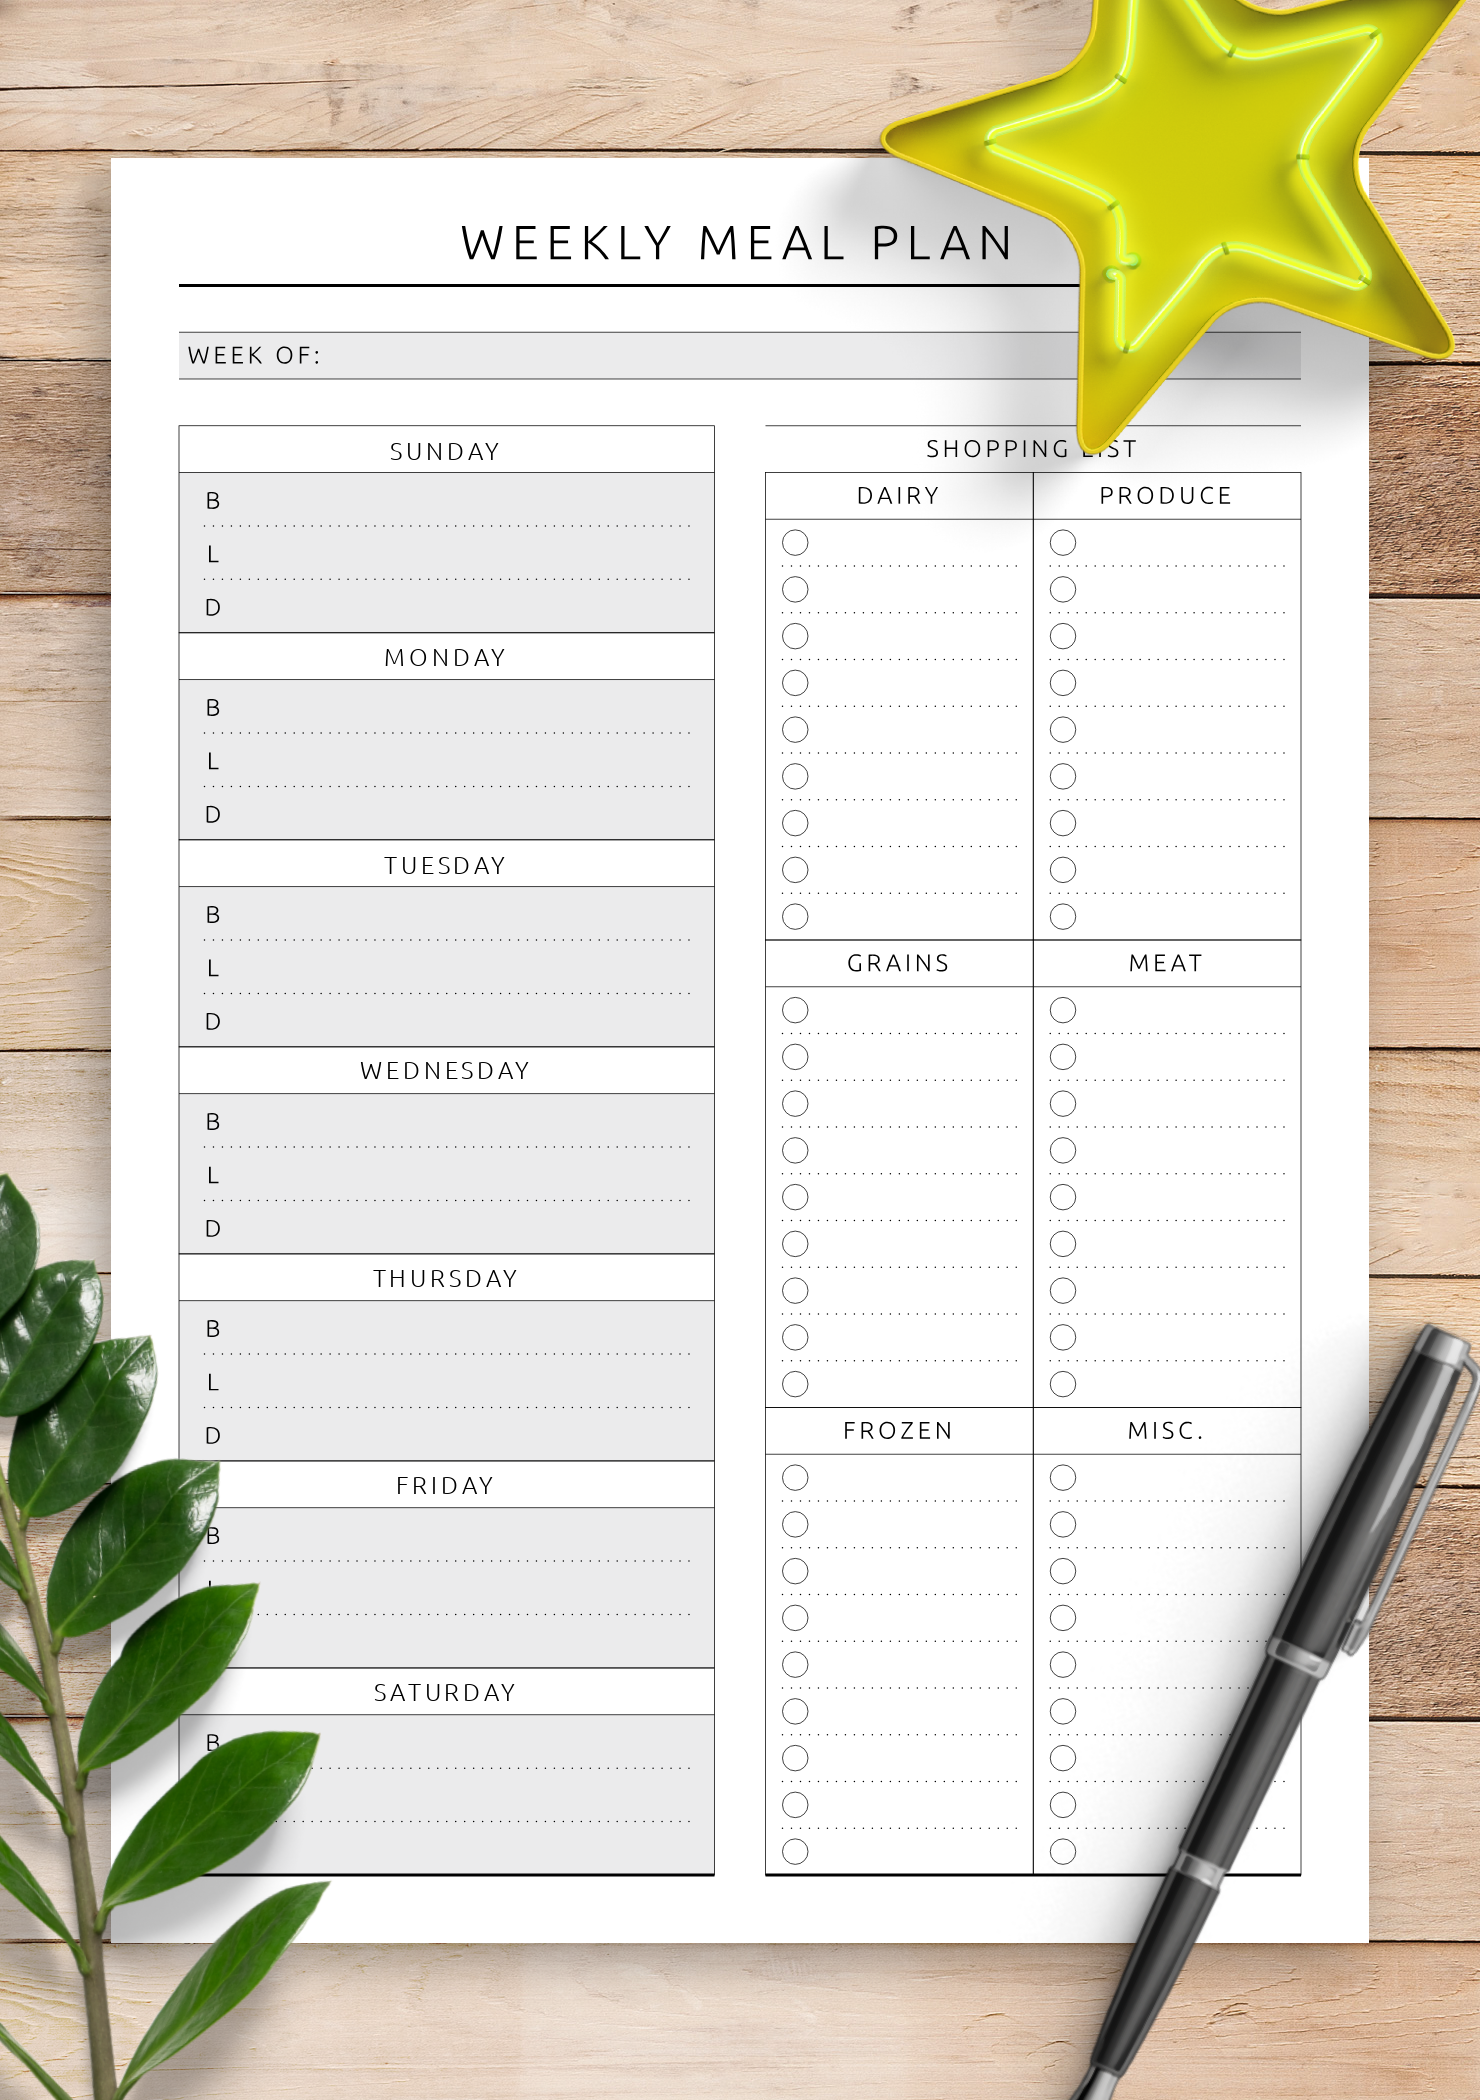 Download Printable Weekly Meal Plan with Shopping List - Original Within Menu Planner With Grocery List Template